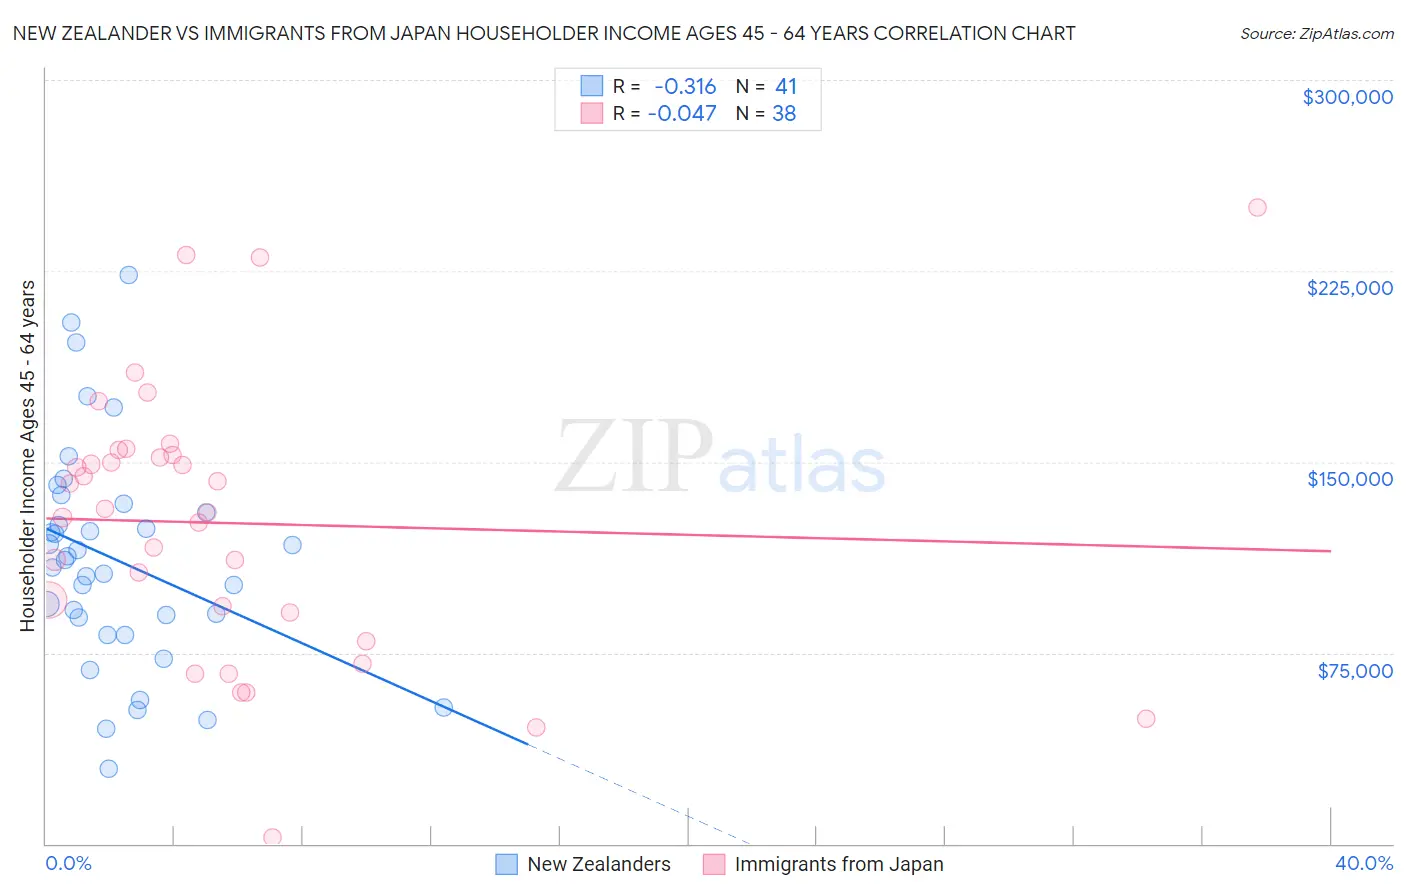 New Zealander vs Immigrants from Japan Householder Income Ages 45 - 64 years